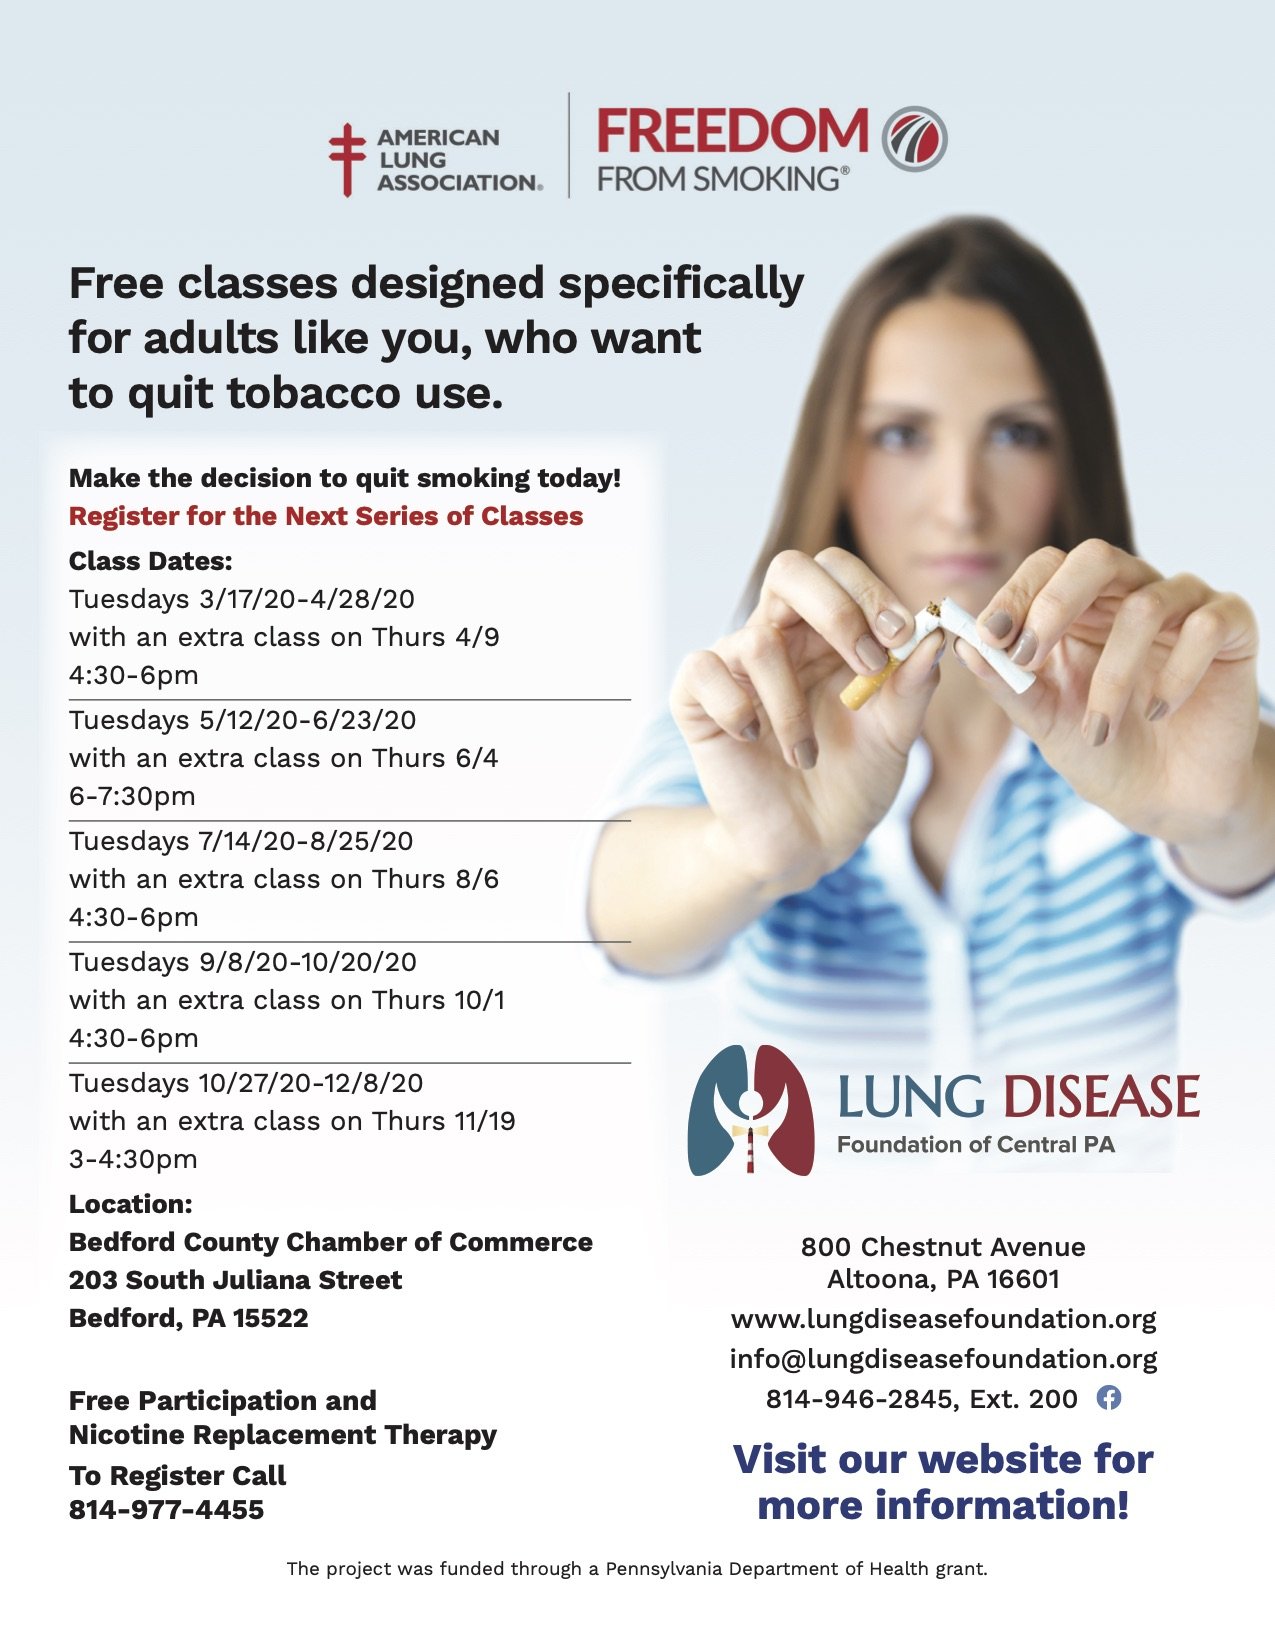 Free classes designed specifically for adults like you, who want to quit tobacco use, Bedford.